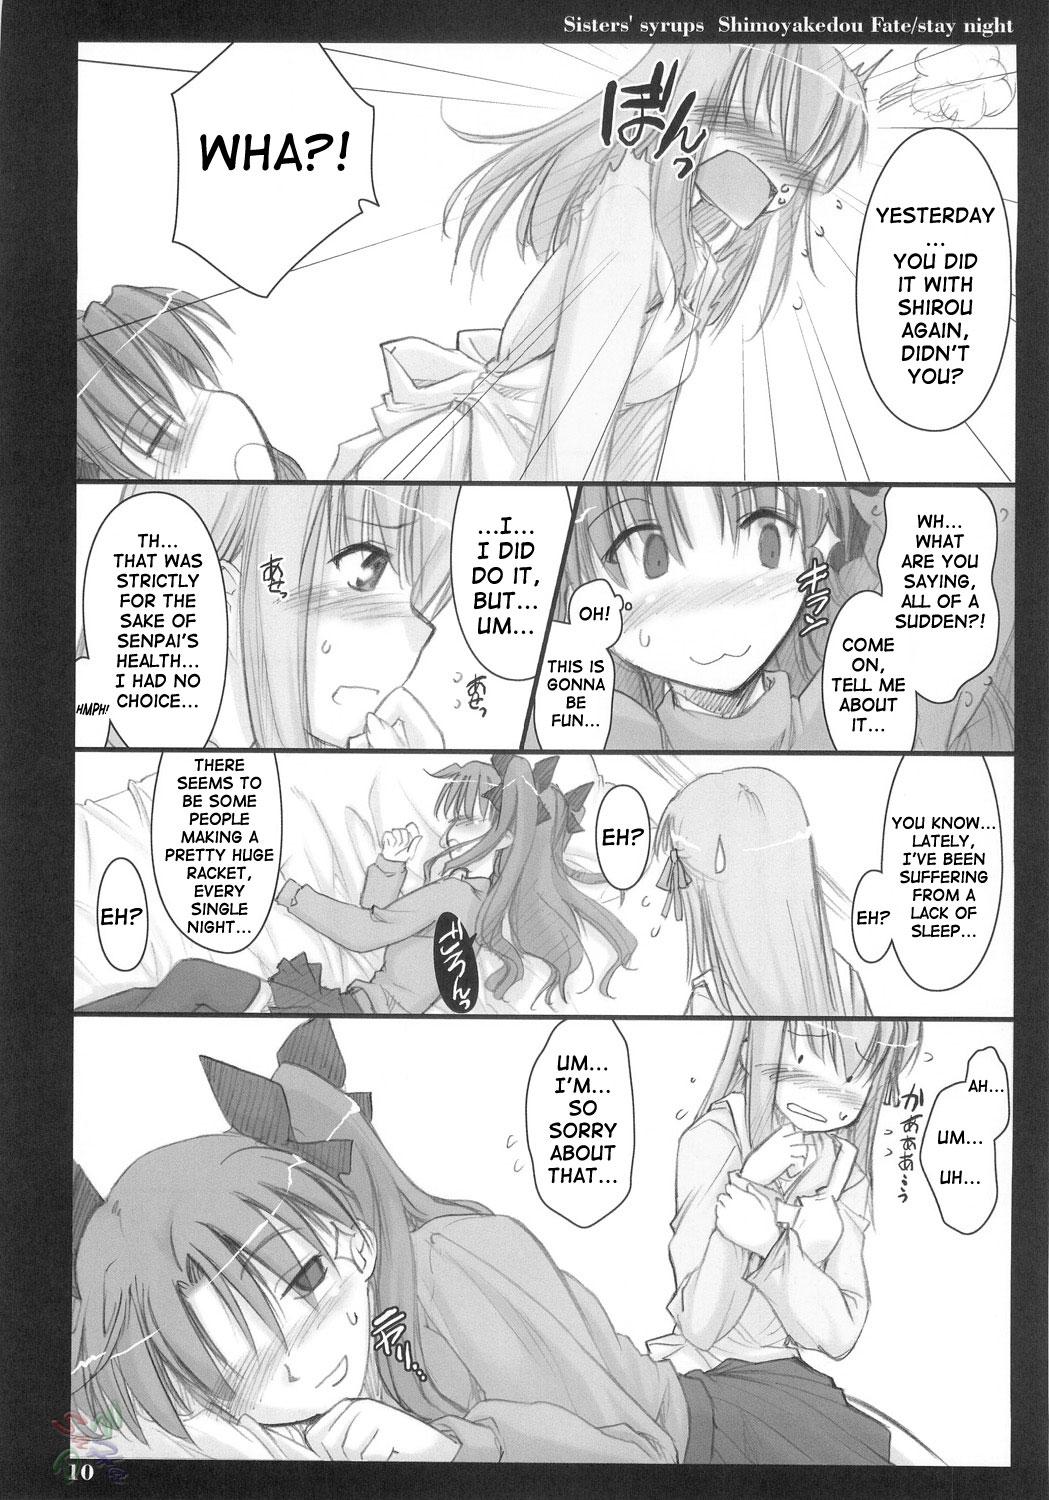 Cum Eating Sisters' Syrups - Fate stay night Fake Tits - Page 9